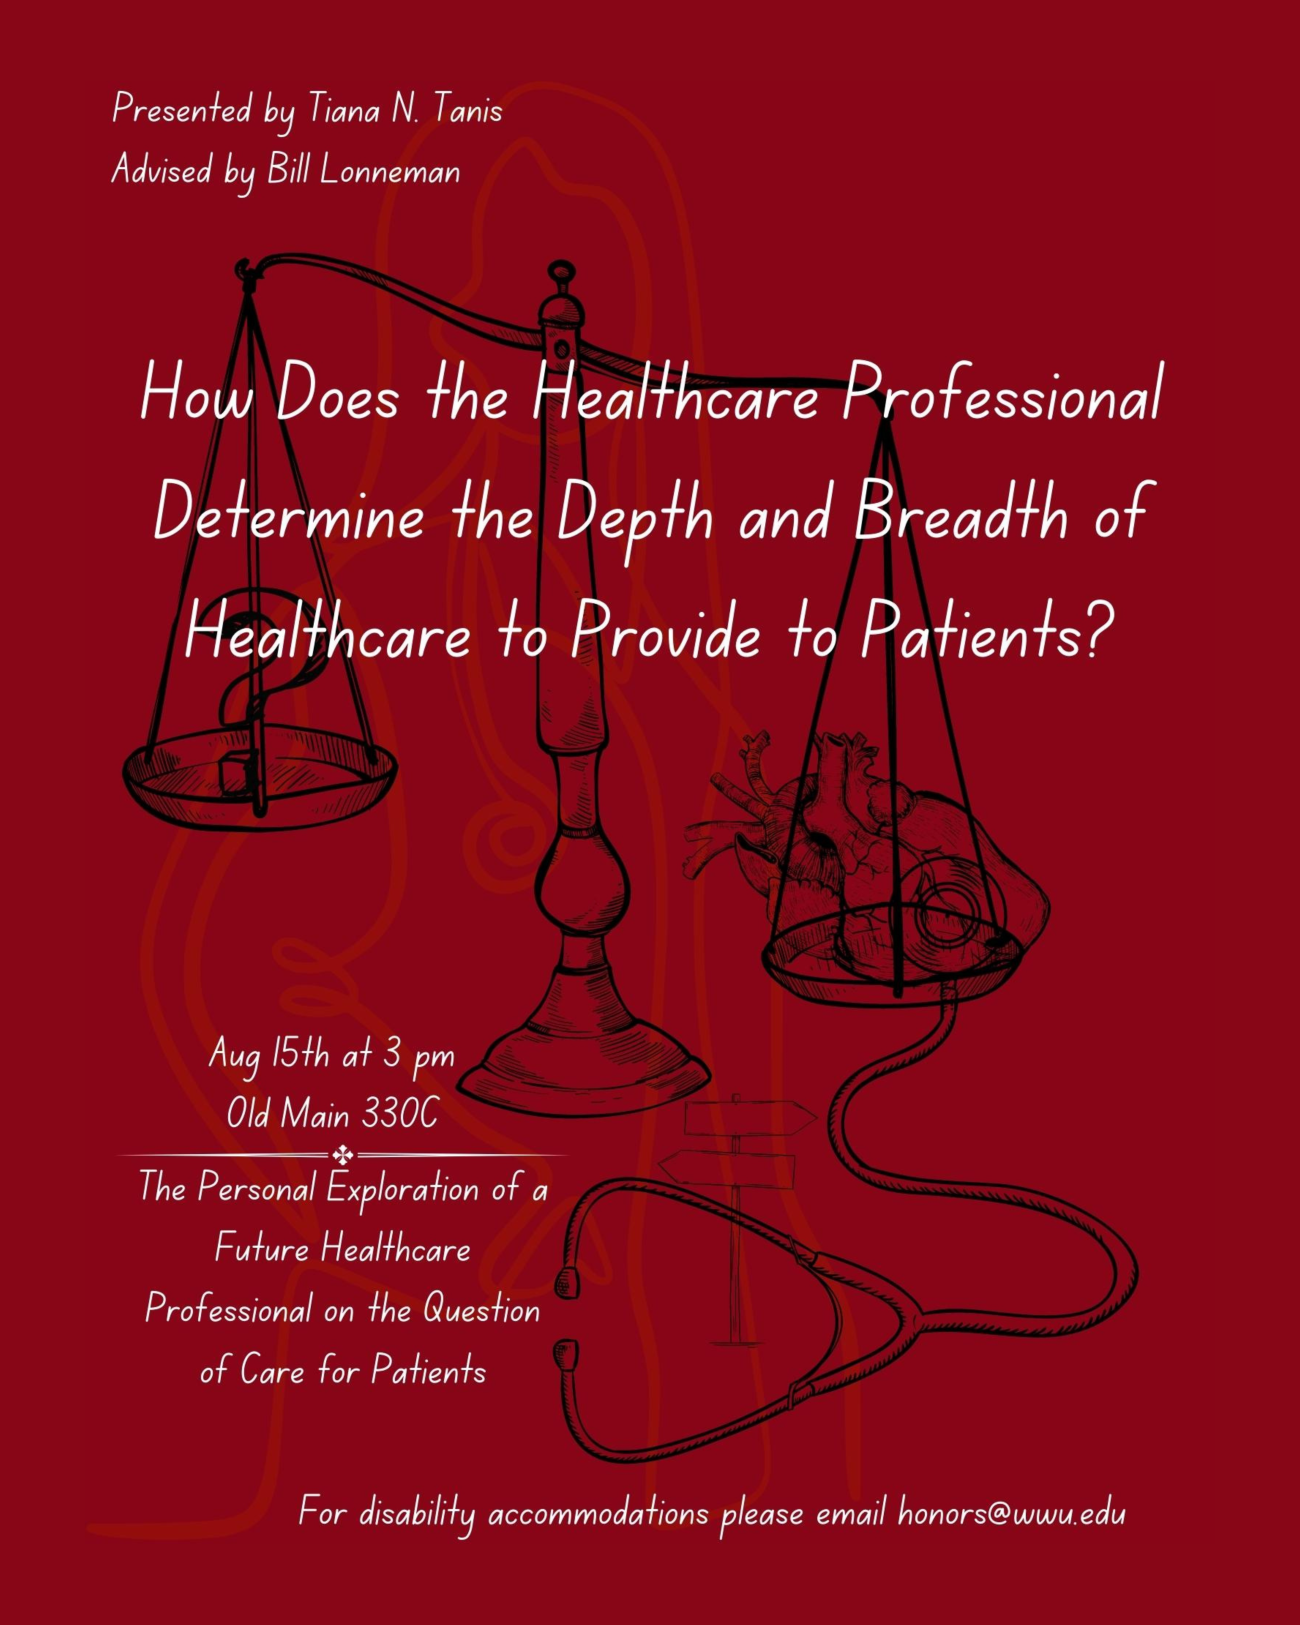 A balancing scale, with a question mark symbol on the left, and a anatomical heart on the right. A stethoscope is held to the heart on the scale, with a crossroads sign placed between the two earpieces. The text reads "Presented by Tiana N. Tanis. Advised by Bill Lonneman. How Does the Healthcare Professional Determine the Depth and Breadth of Healthcare to Provide to Patients? The Personal Exploration of a Future Healthcare Professional with the Question of Care for Patients.